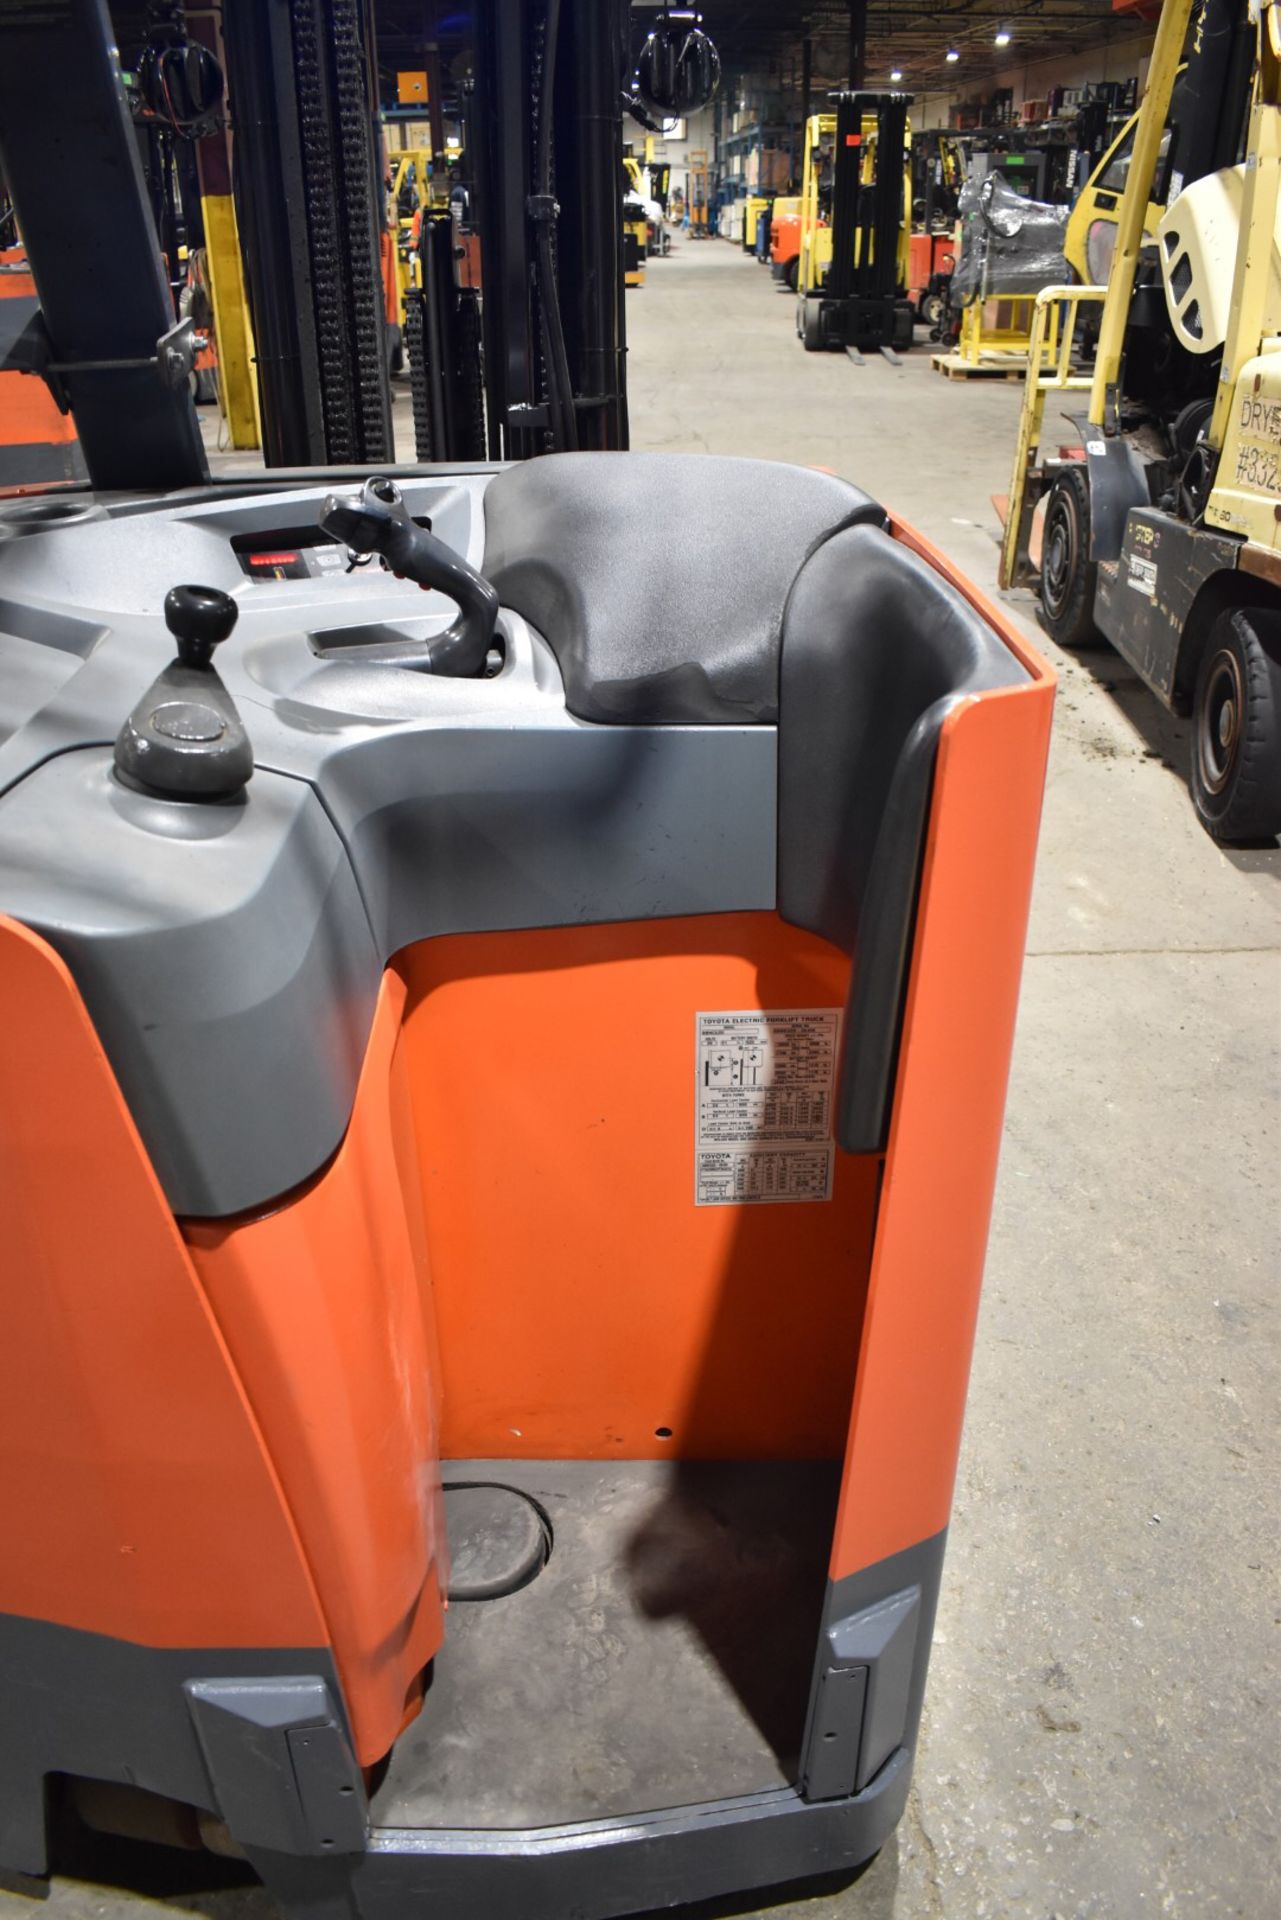 TOYOTA (2017) 8BNCU20 STAND ON ELECTRIC FORKLIFT WITH, 4,000LBS CAPACITY, 36V BATTERY, 276.5" MAX - Image 4 of 6